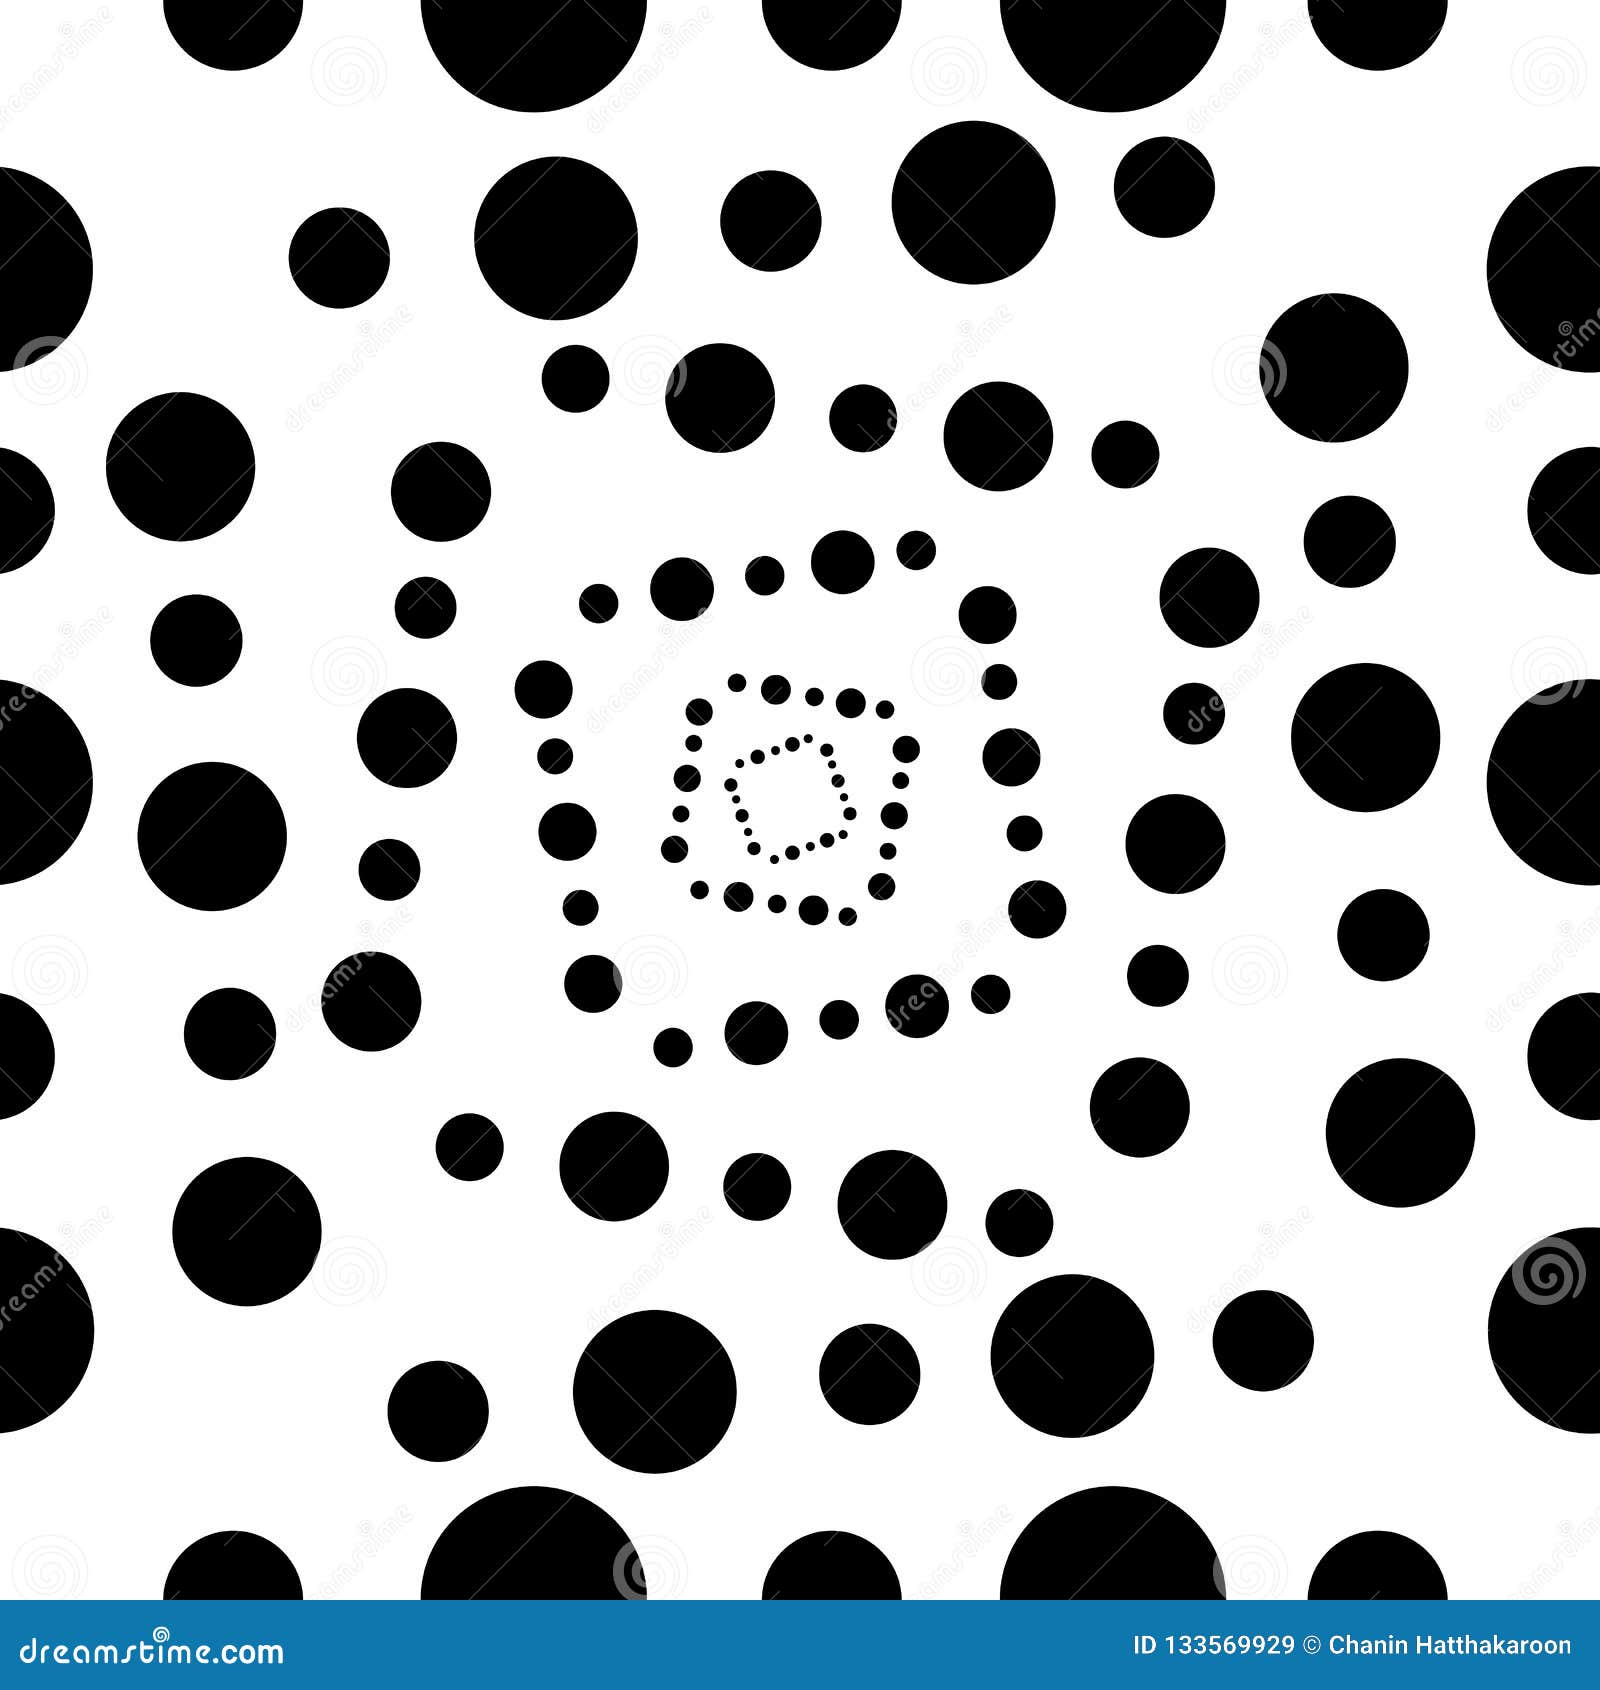 Circle Spots Scatter Geometric Black and White Texture Seamless Stock ...